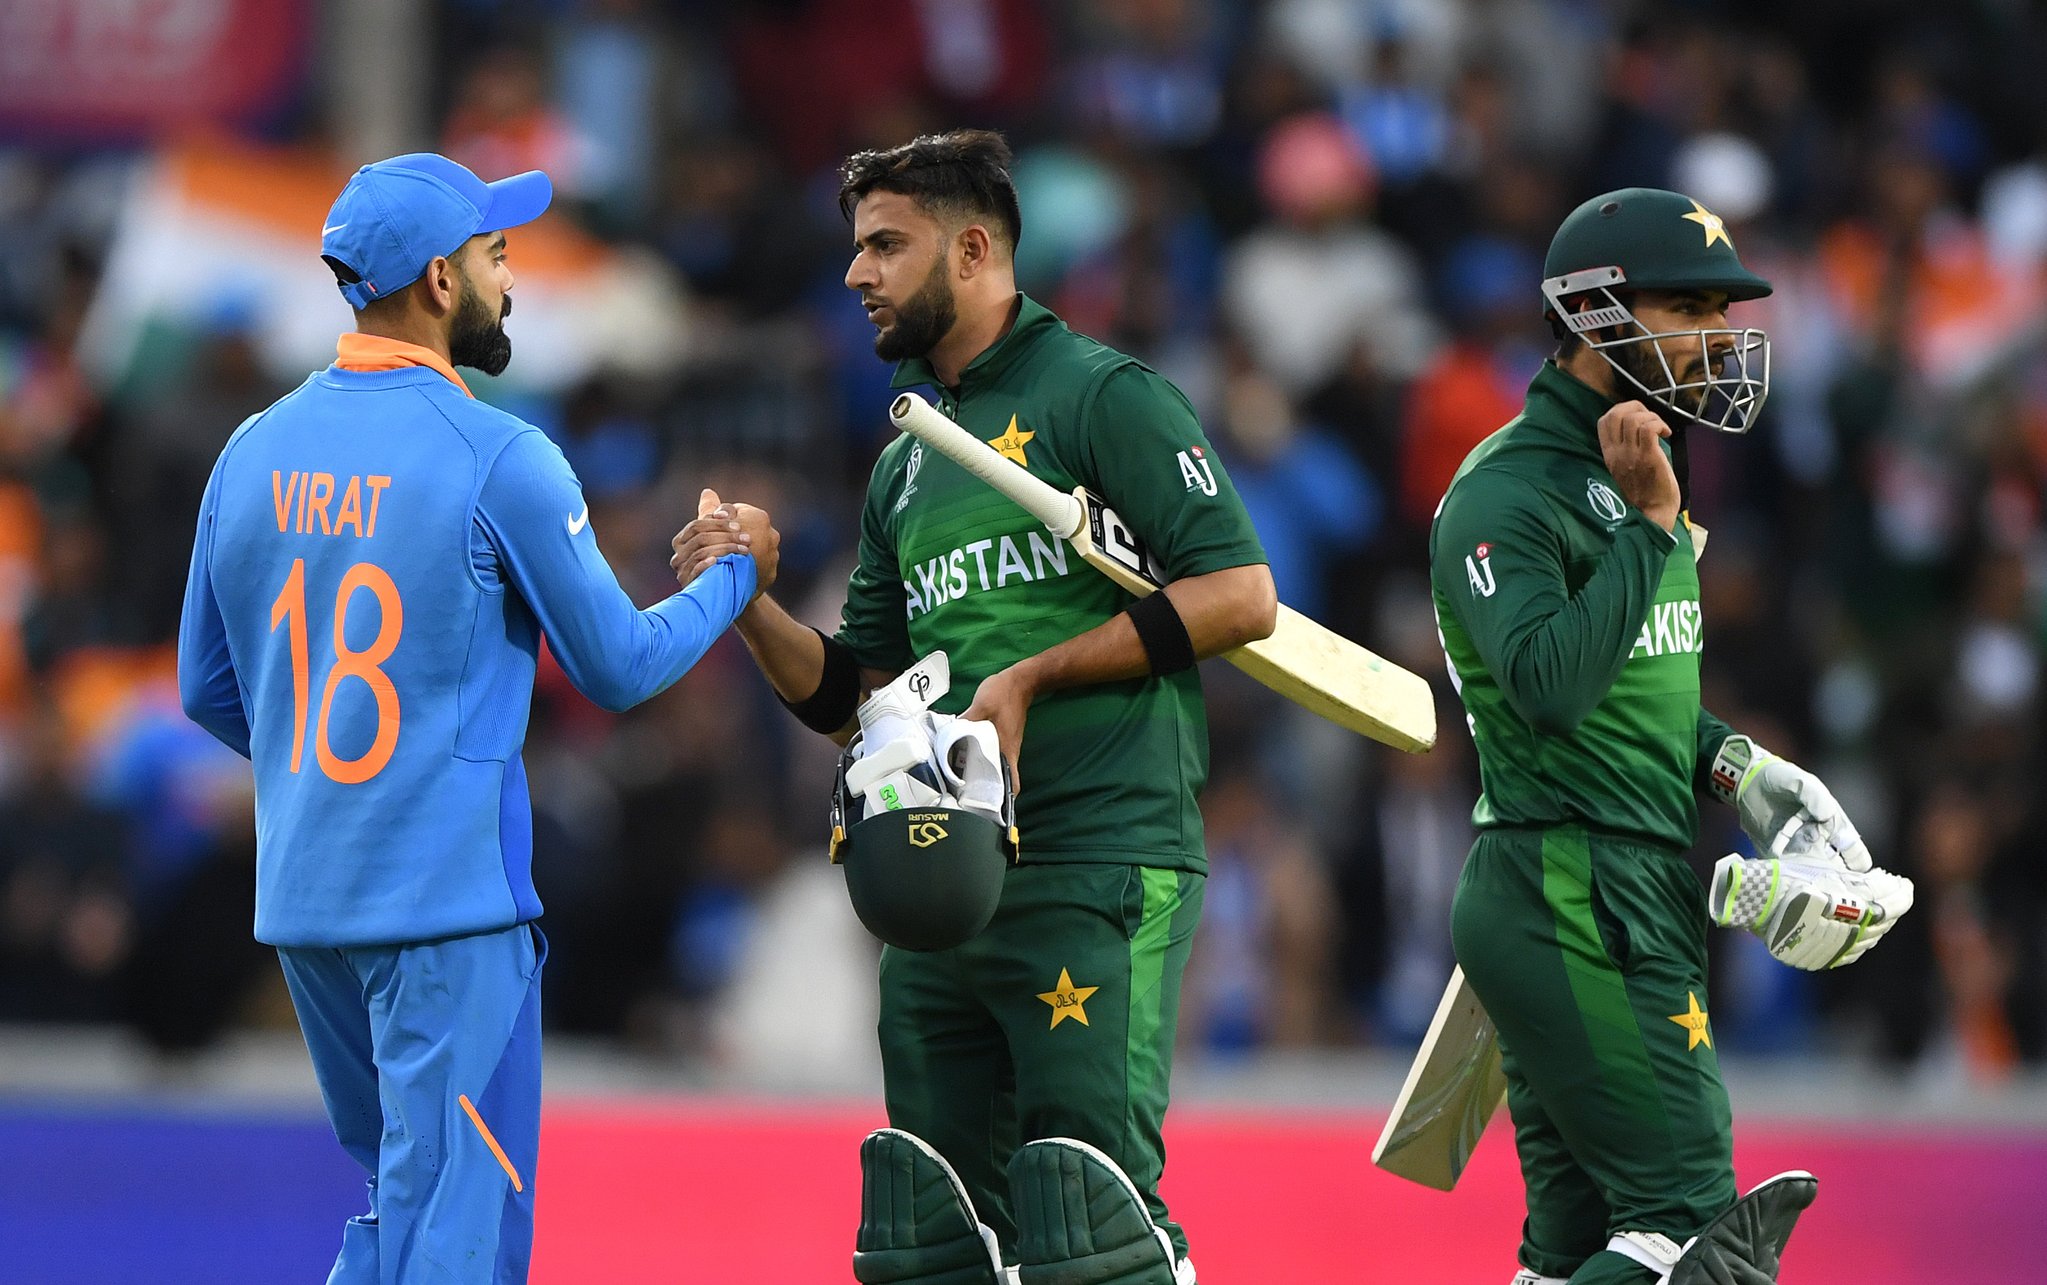 World Cup 2019: Pakistan has fallen behind the ranks in ODIs 7